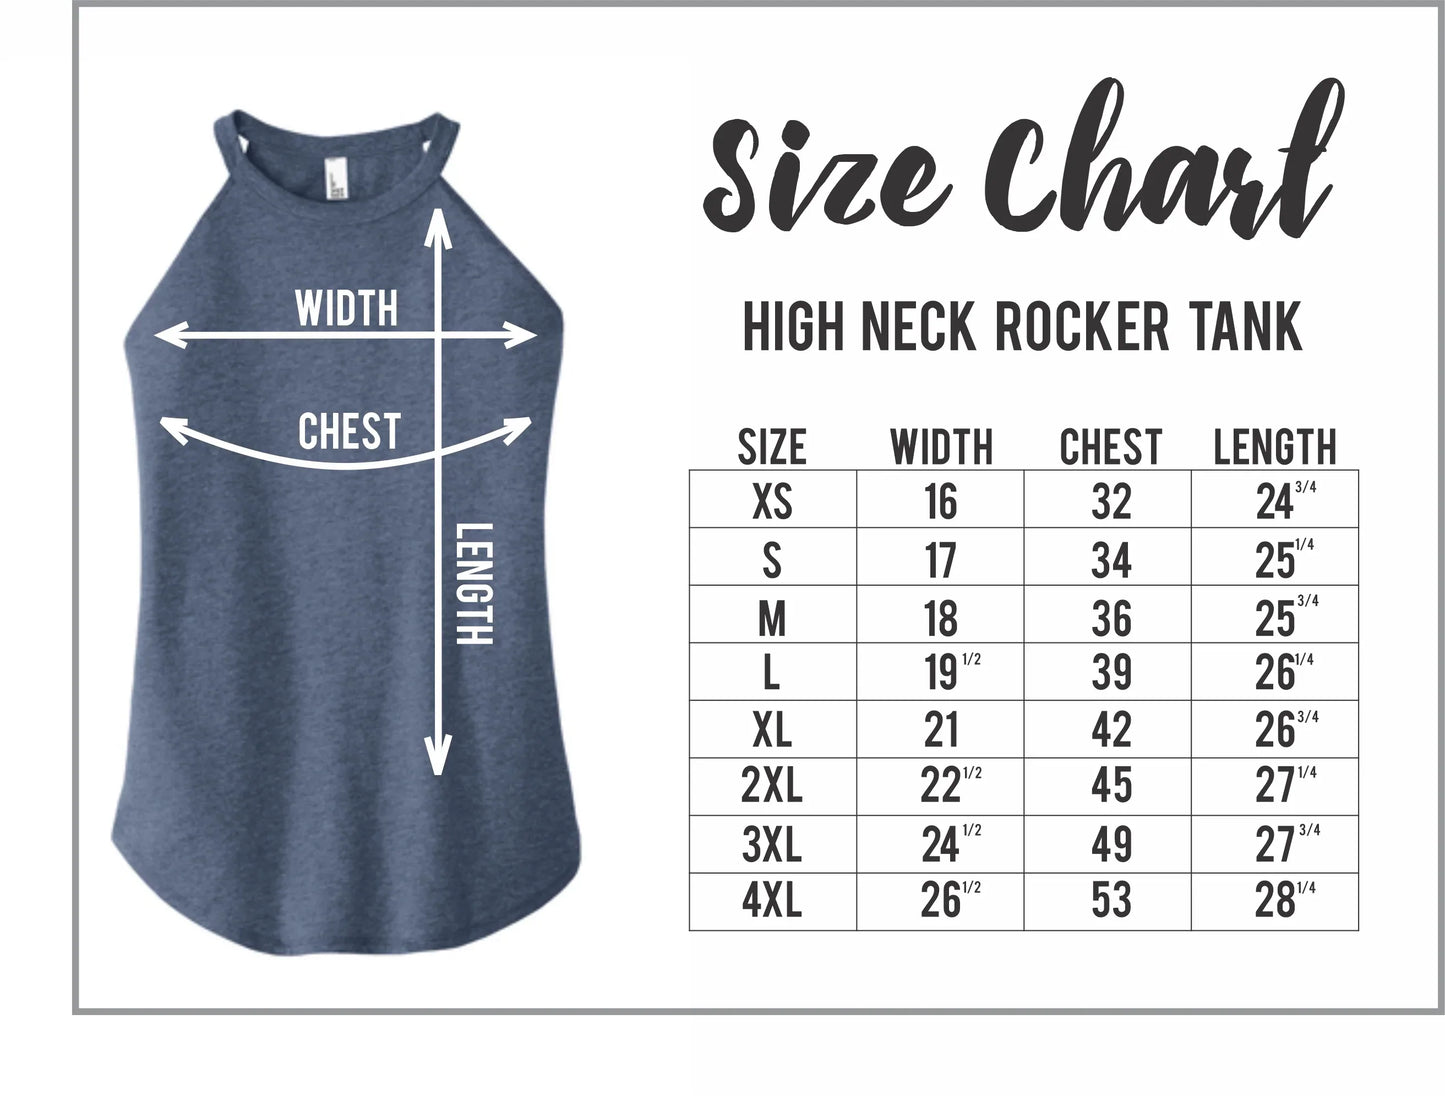 Doing it for the Donuts - High Neck Rocker Tank